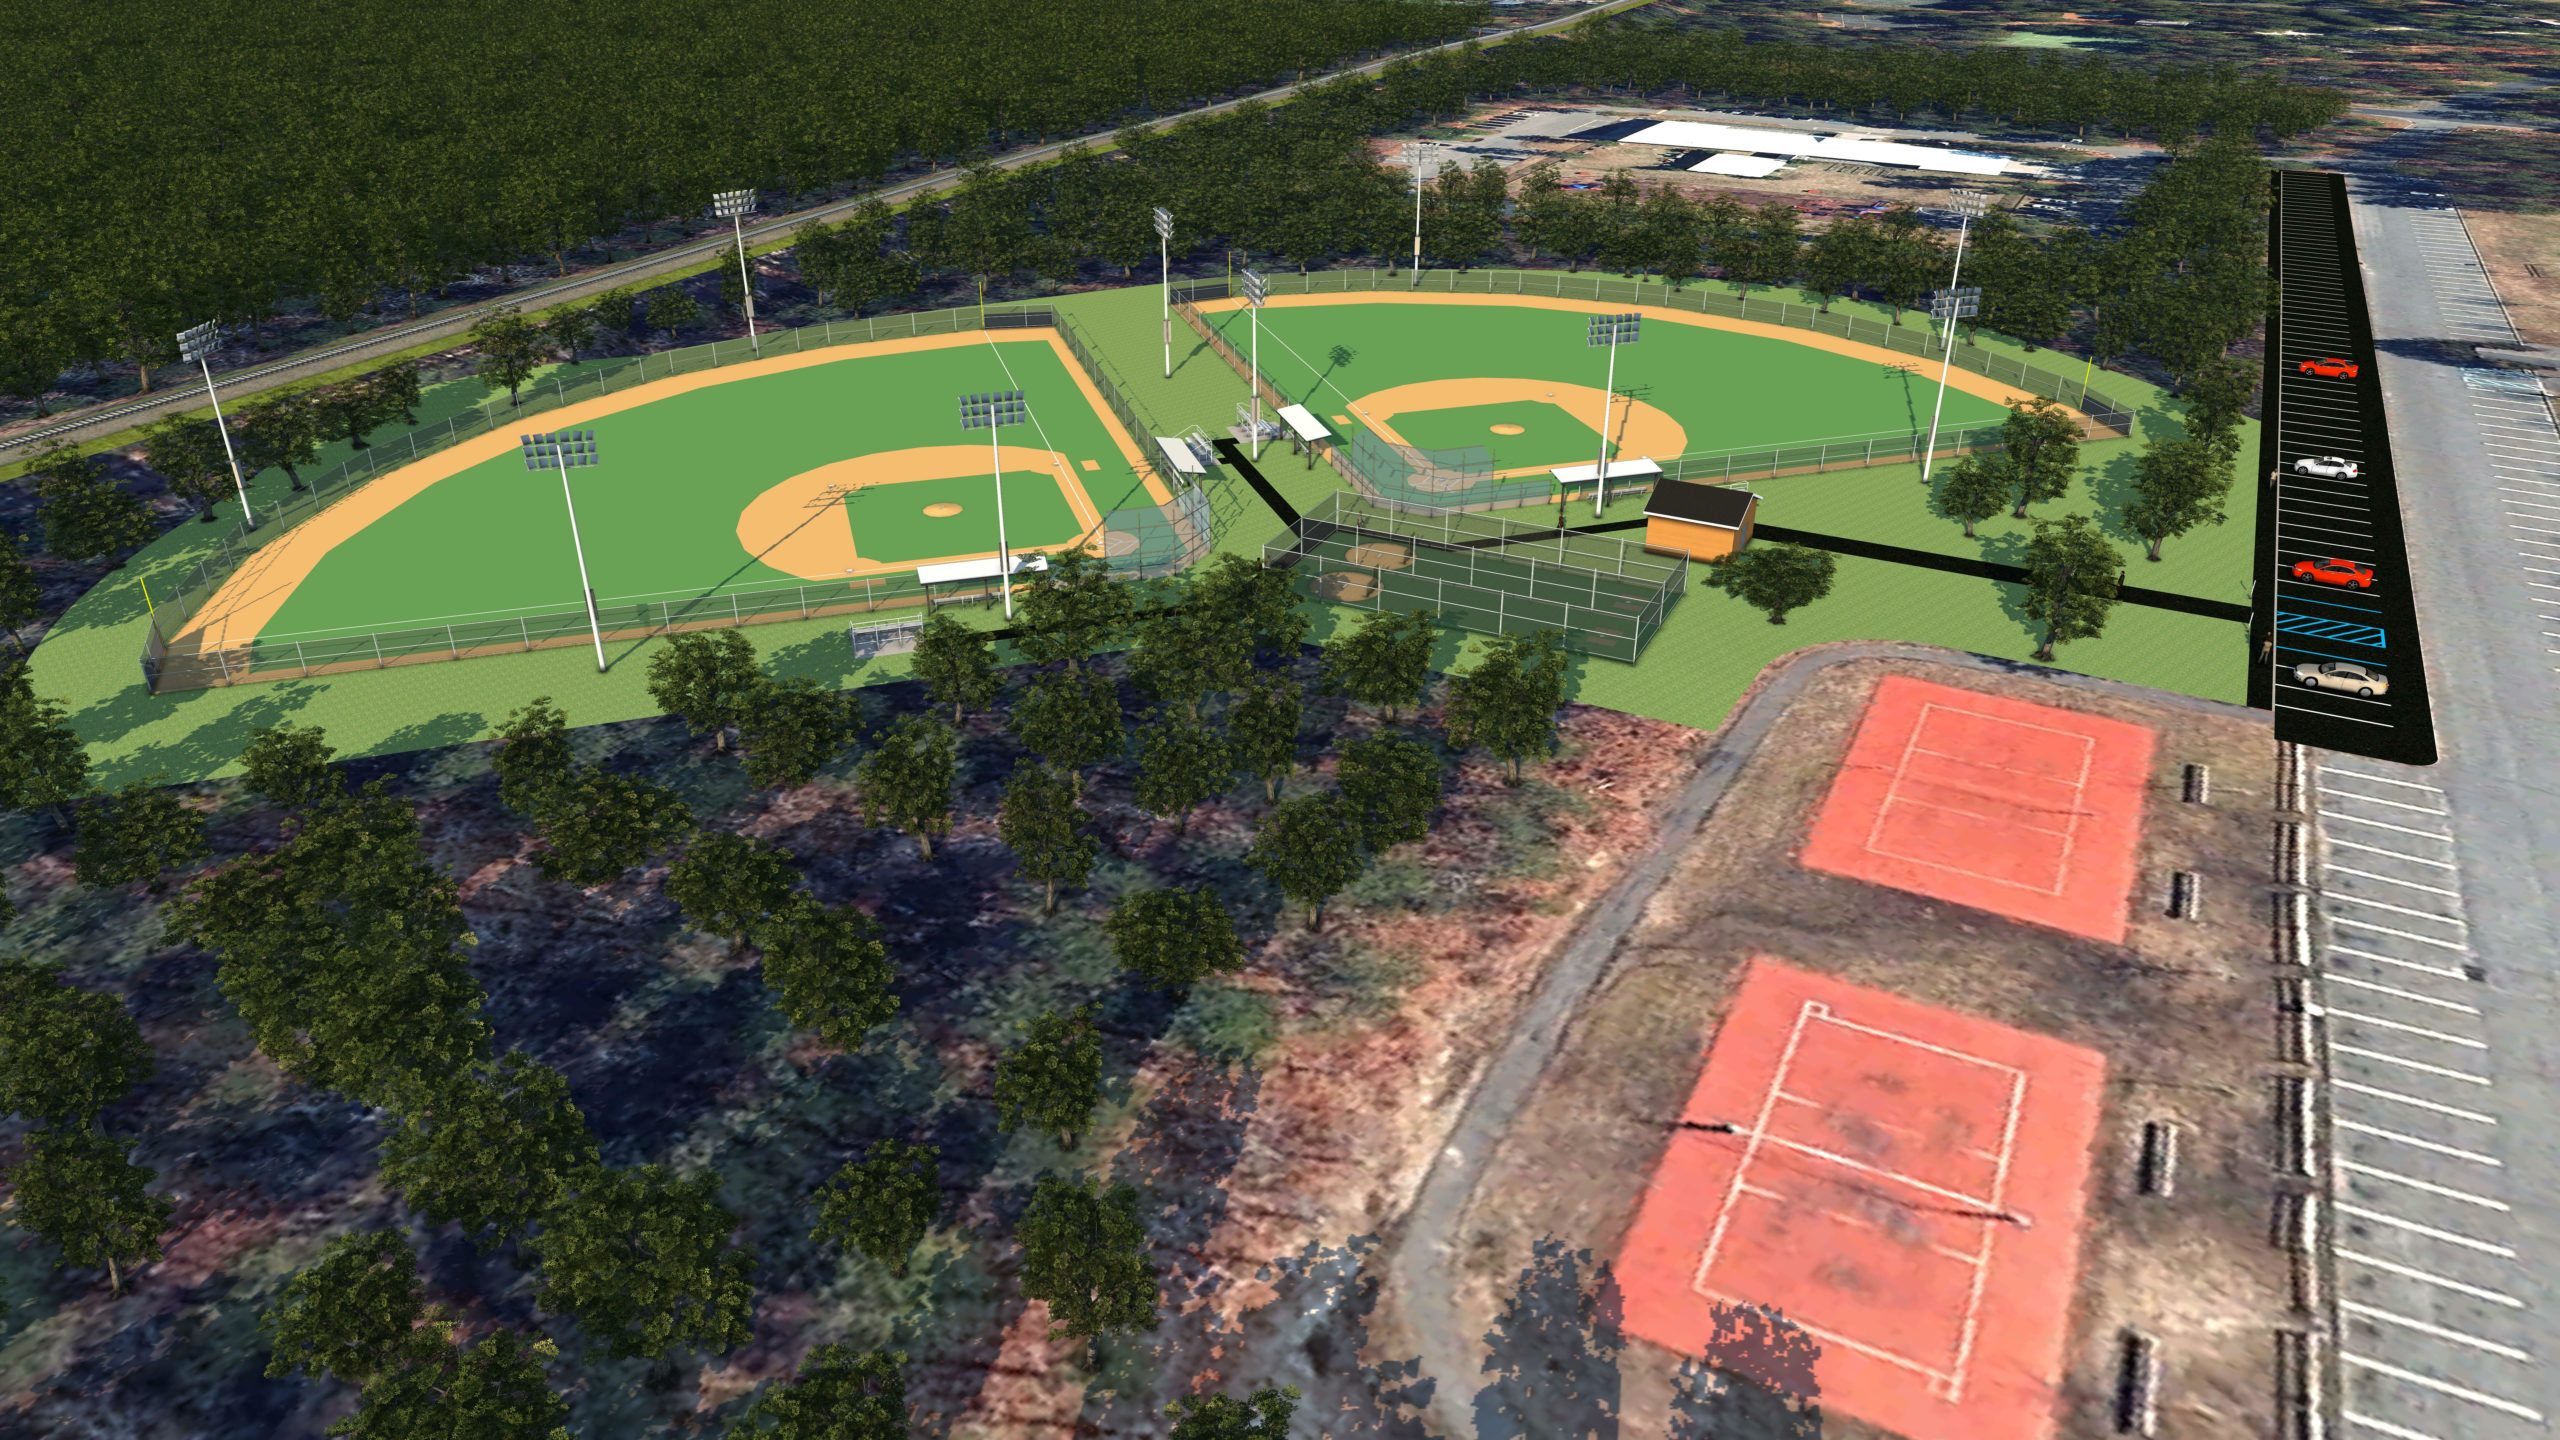 Renderings of what the proposed new ball fields at the town athletic facility off Stephen Hands Path would look like. One field would be a regulation little league baseball field while the other would have flexible spacing of base paths and pitching mounts to accomodate use by different leagues. 